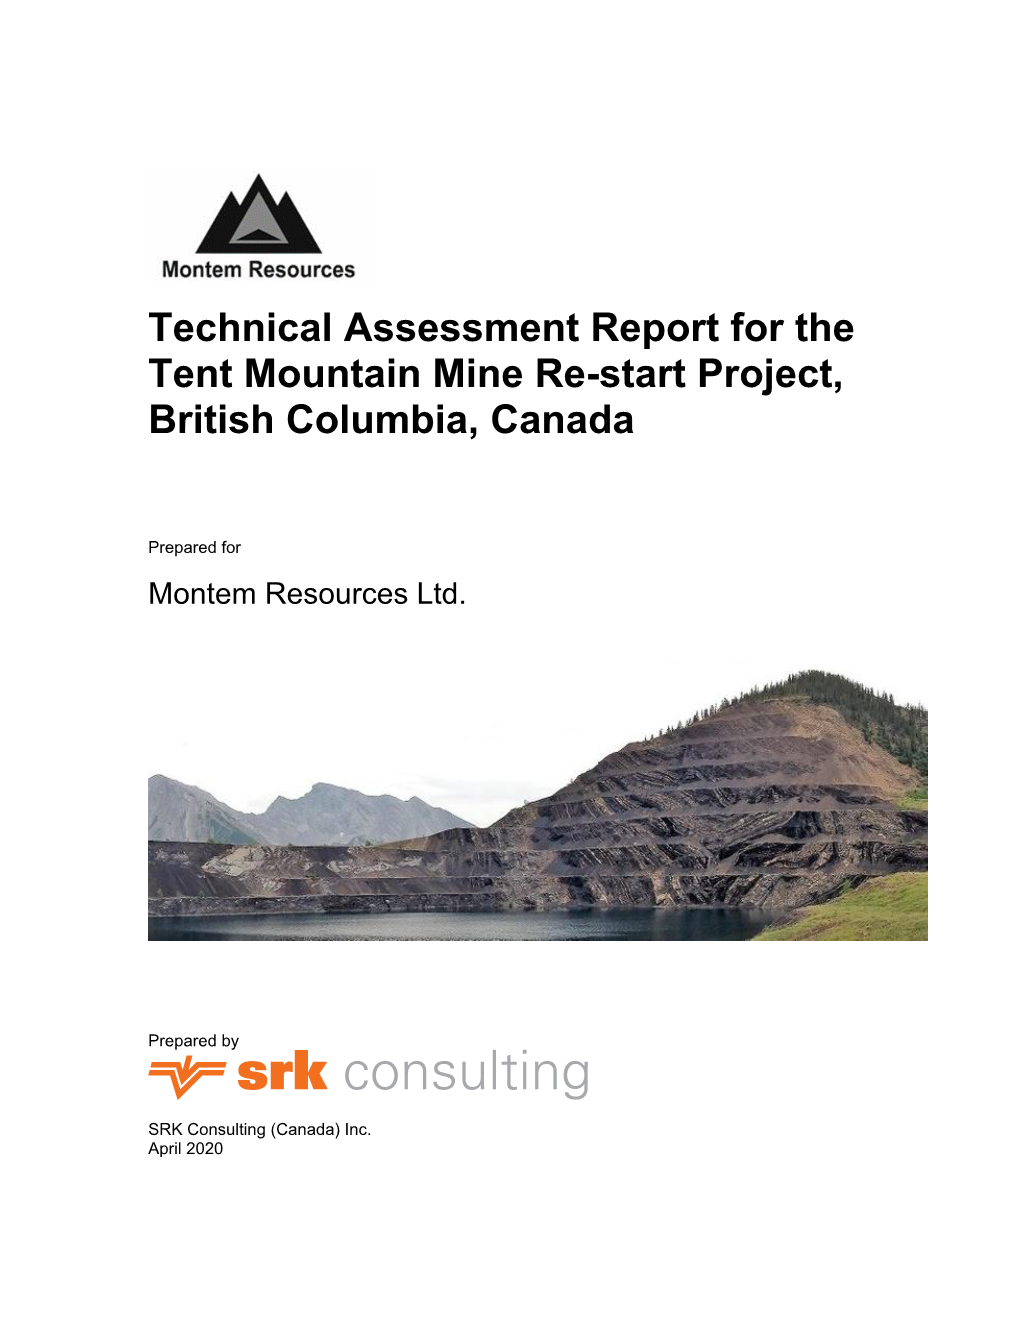 Technical Assessment Report for the Tent Mountain Mine Re-Start Project, British Columbia, Canada